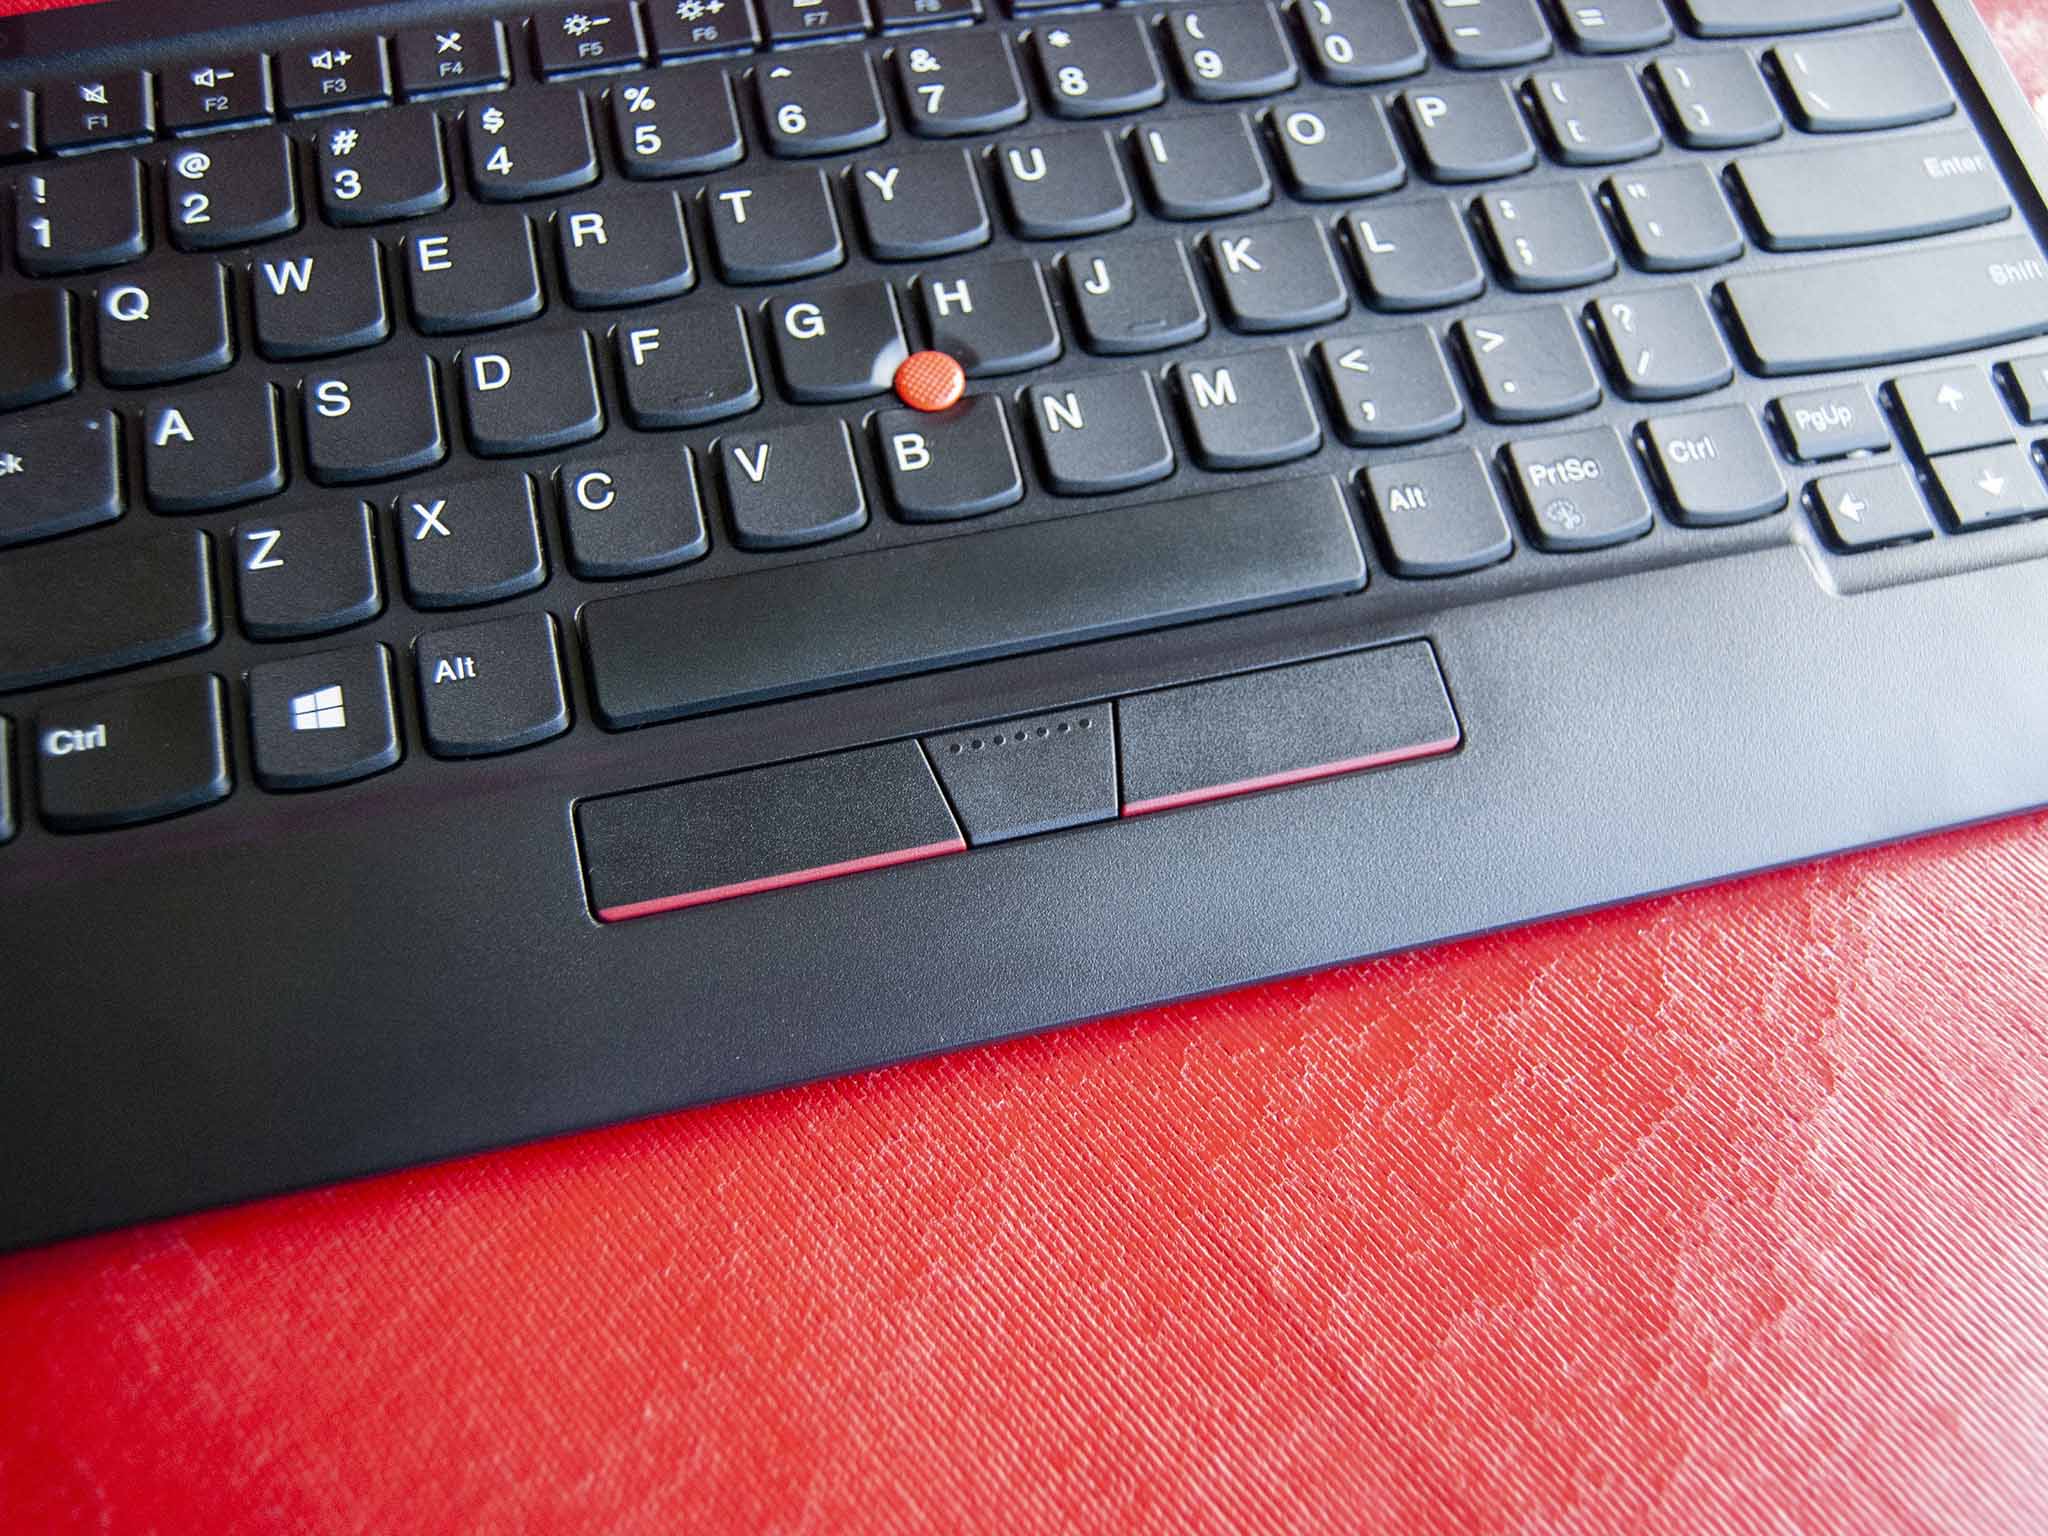 Thinkpad Trackpoint Keyboard Ii Review Deep Travel Compact Build Built In Pointer Windows Central